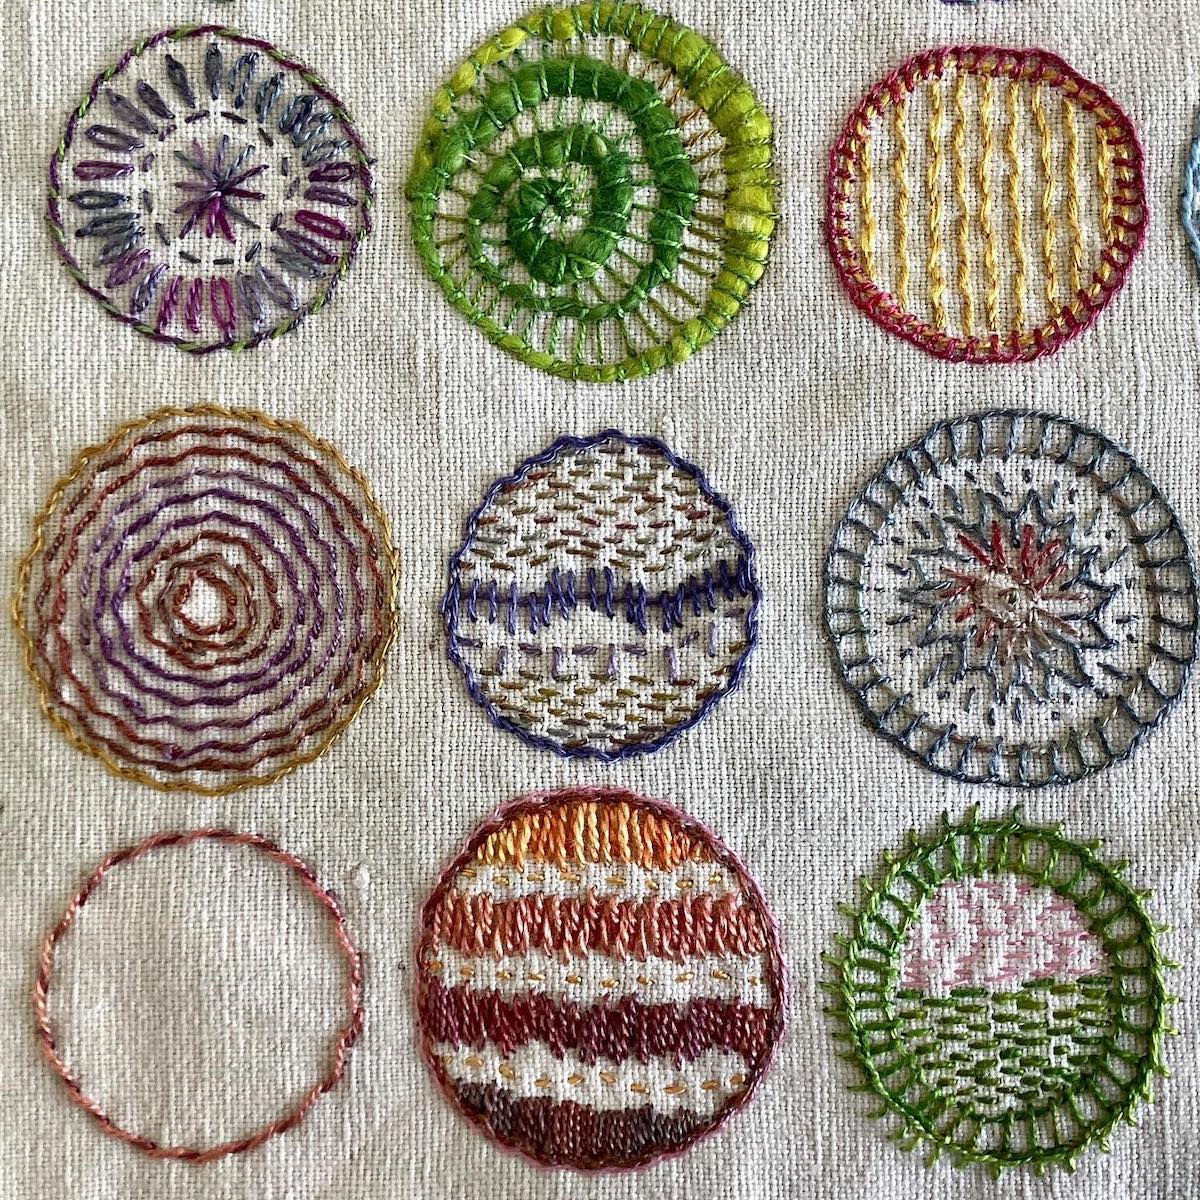 Daily Stitching Project by Karen Turner